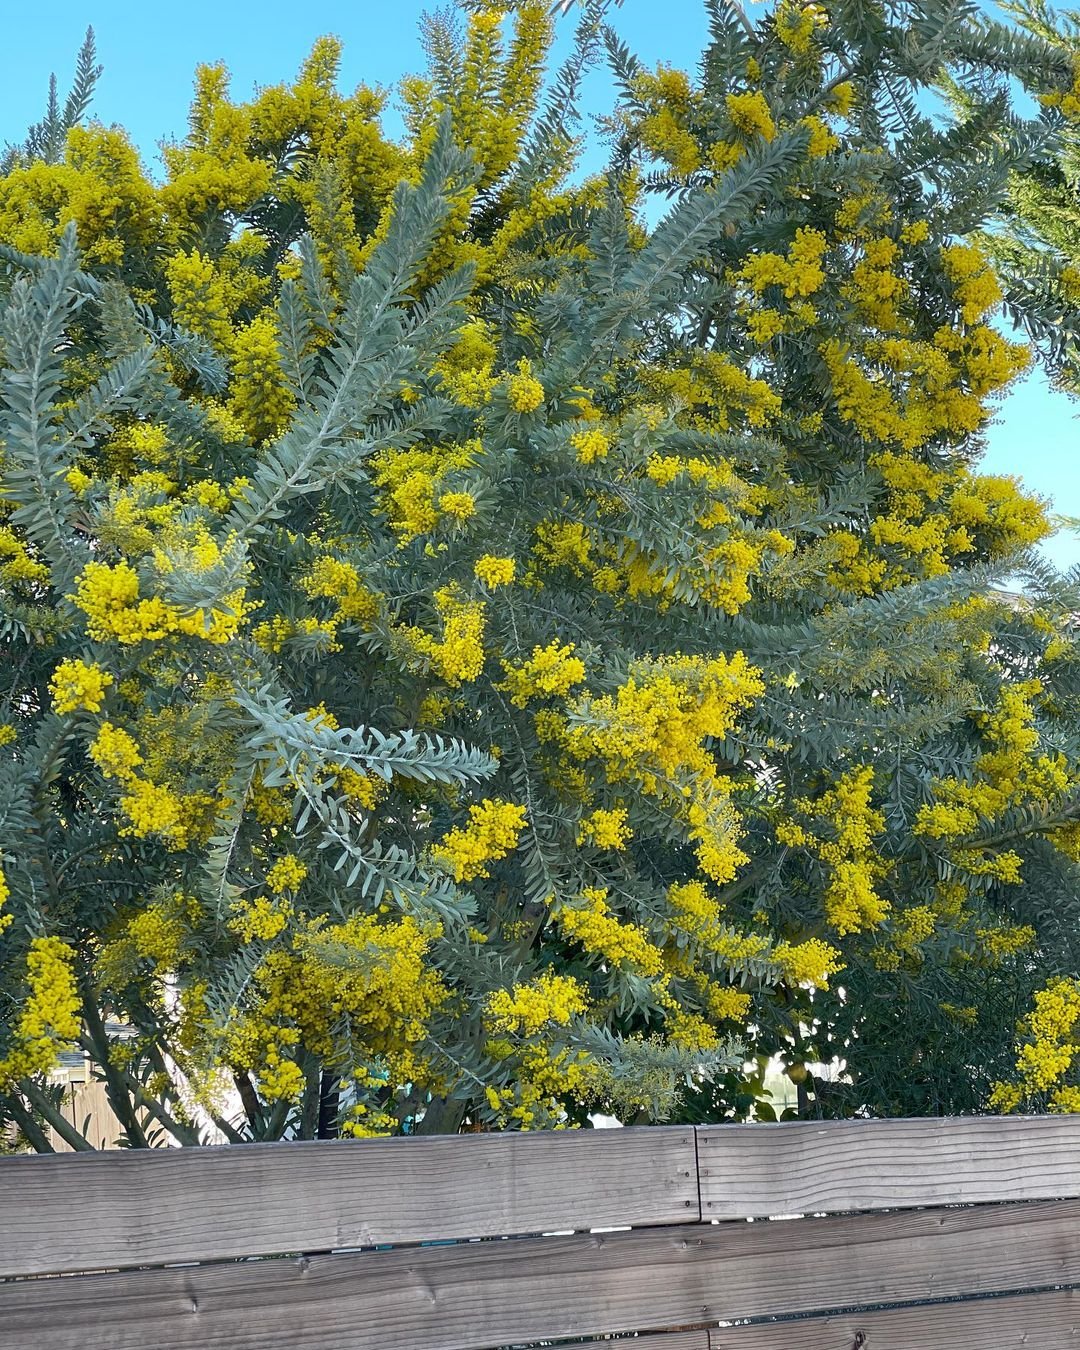 Yellow Acacia bush in bloom with vibrant flowers and green leaves.